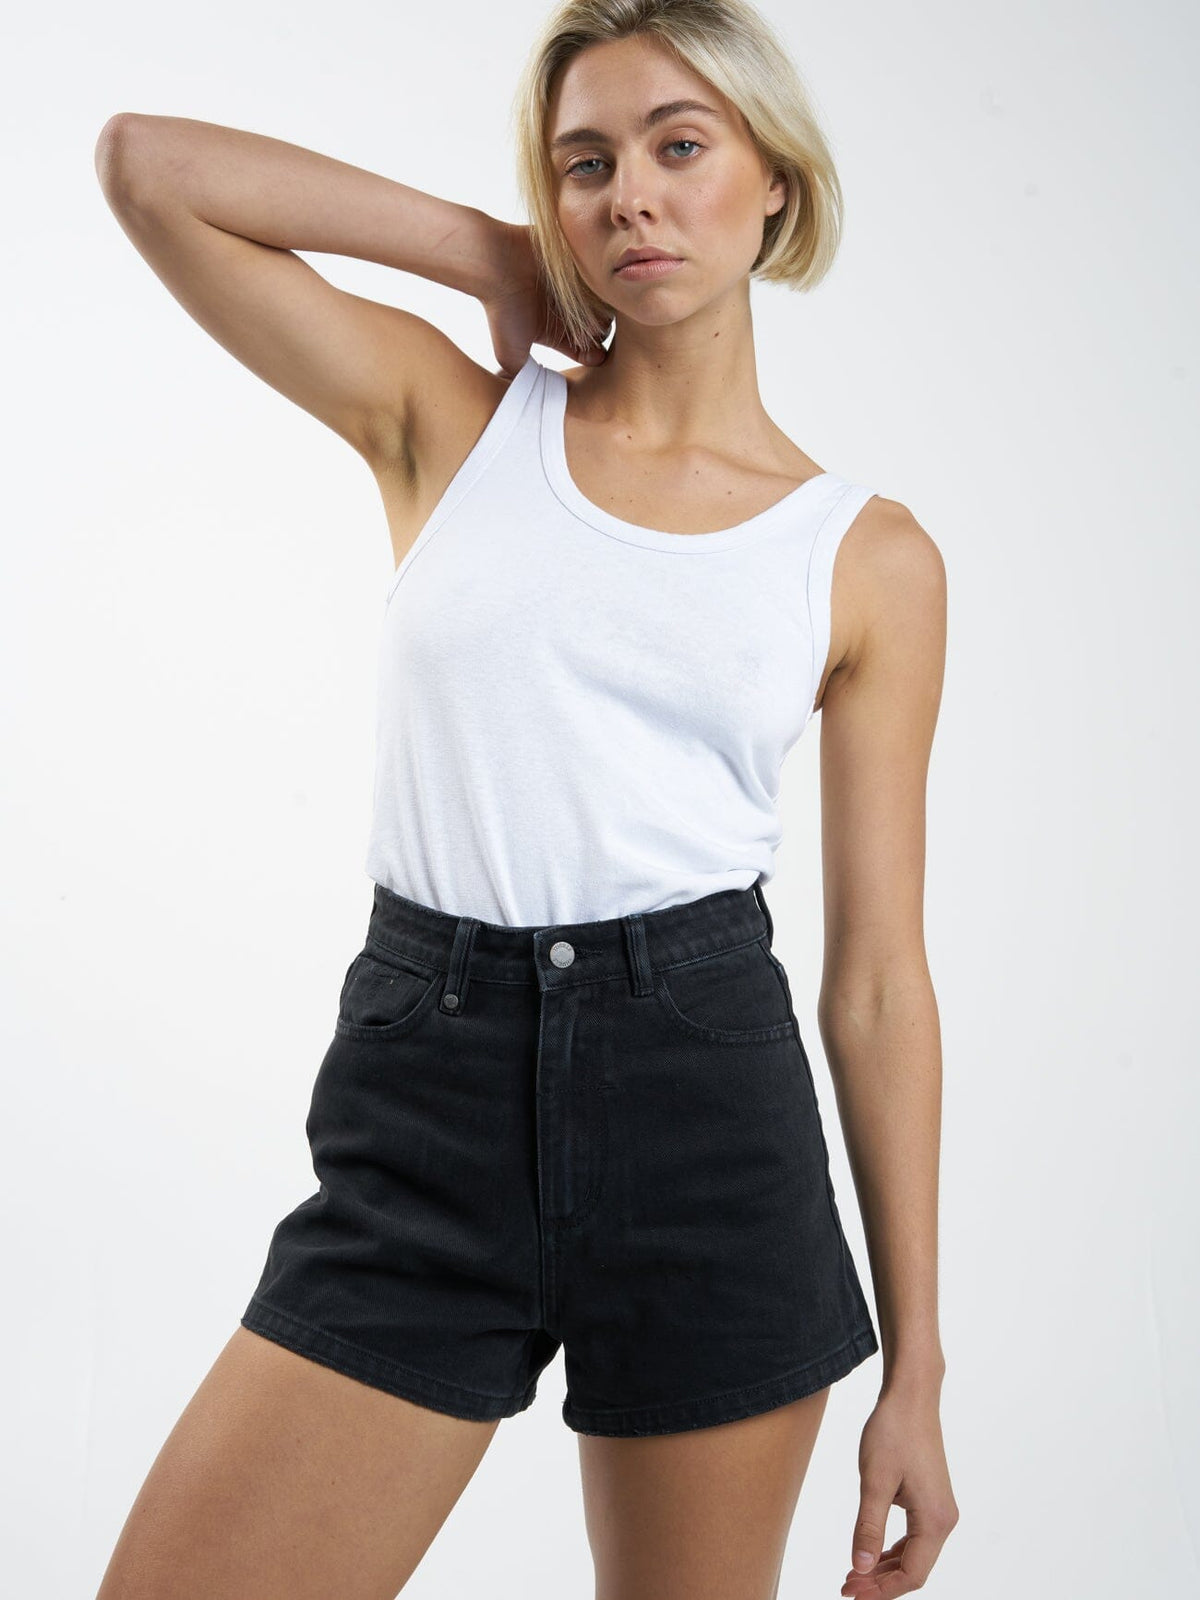 These are the go to denim shorts that will end your quest for the perfect pair. Not too long, not too short and a super flattering fit, these shorts are literally just right. Relaxed and comfy, you will thank yourself later. We promise. 100% Organic Cotton.